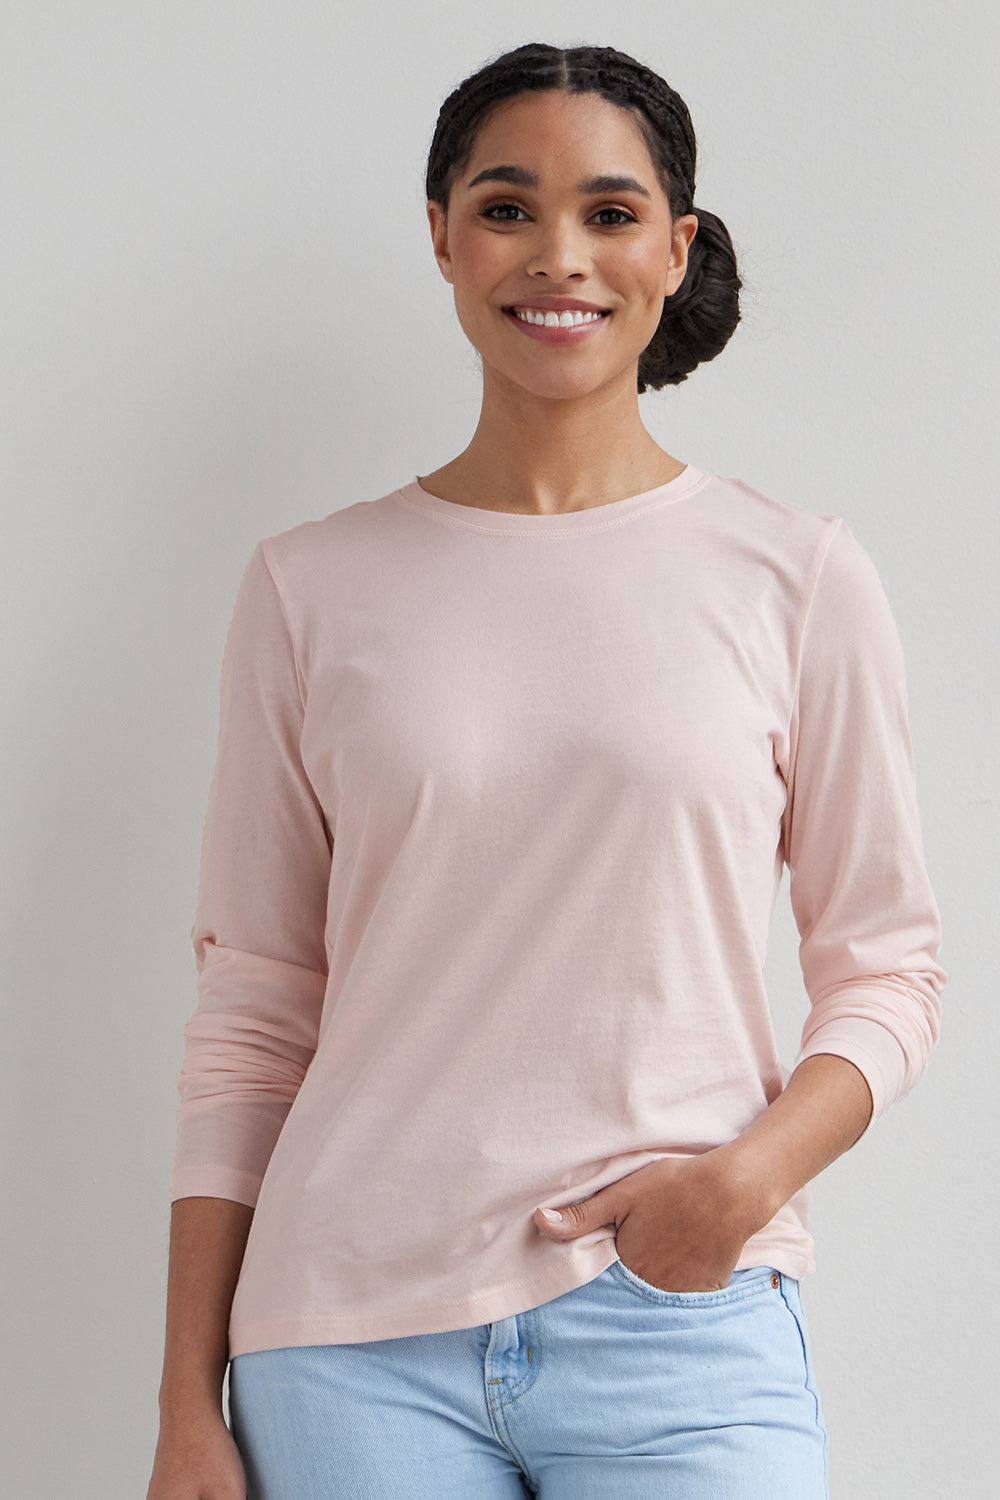 NATURAL Long Sleeve 100% Organic Cotton Hypoallergenic Crew Neck Tee Grown  and Made in USA